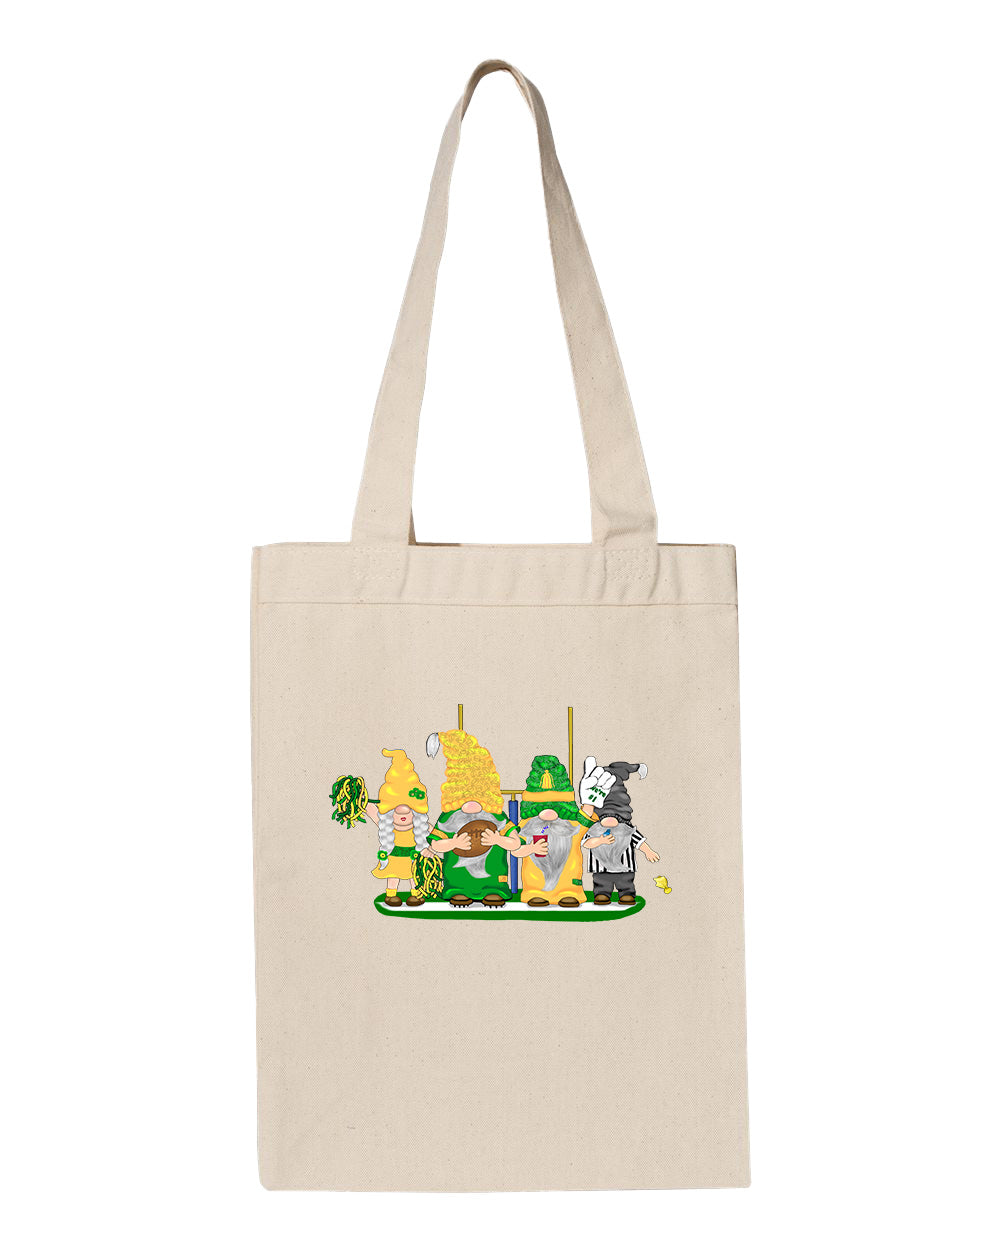 Green & Yellow Football Gnomes  (similar to Eugene) on Gusset Tote